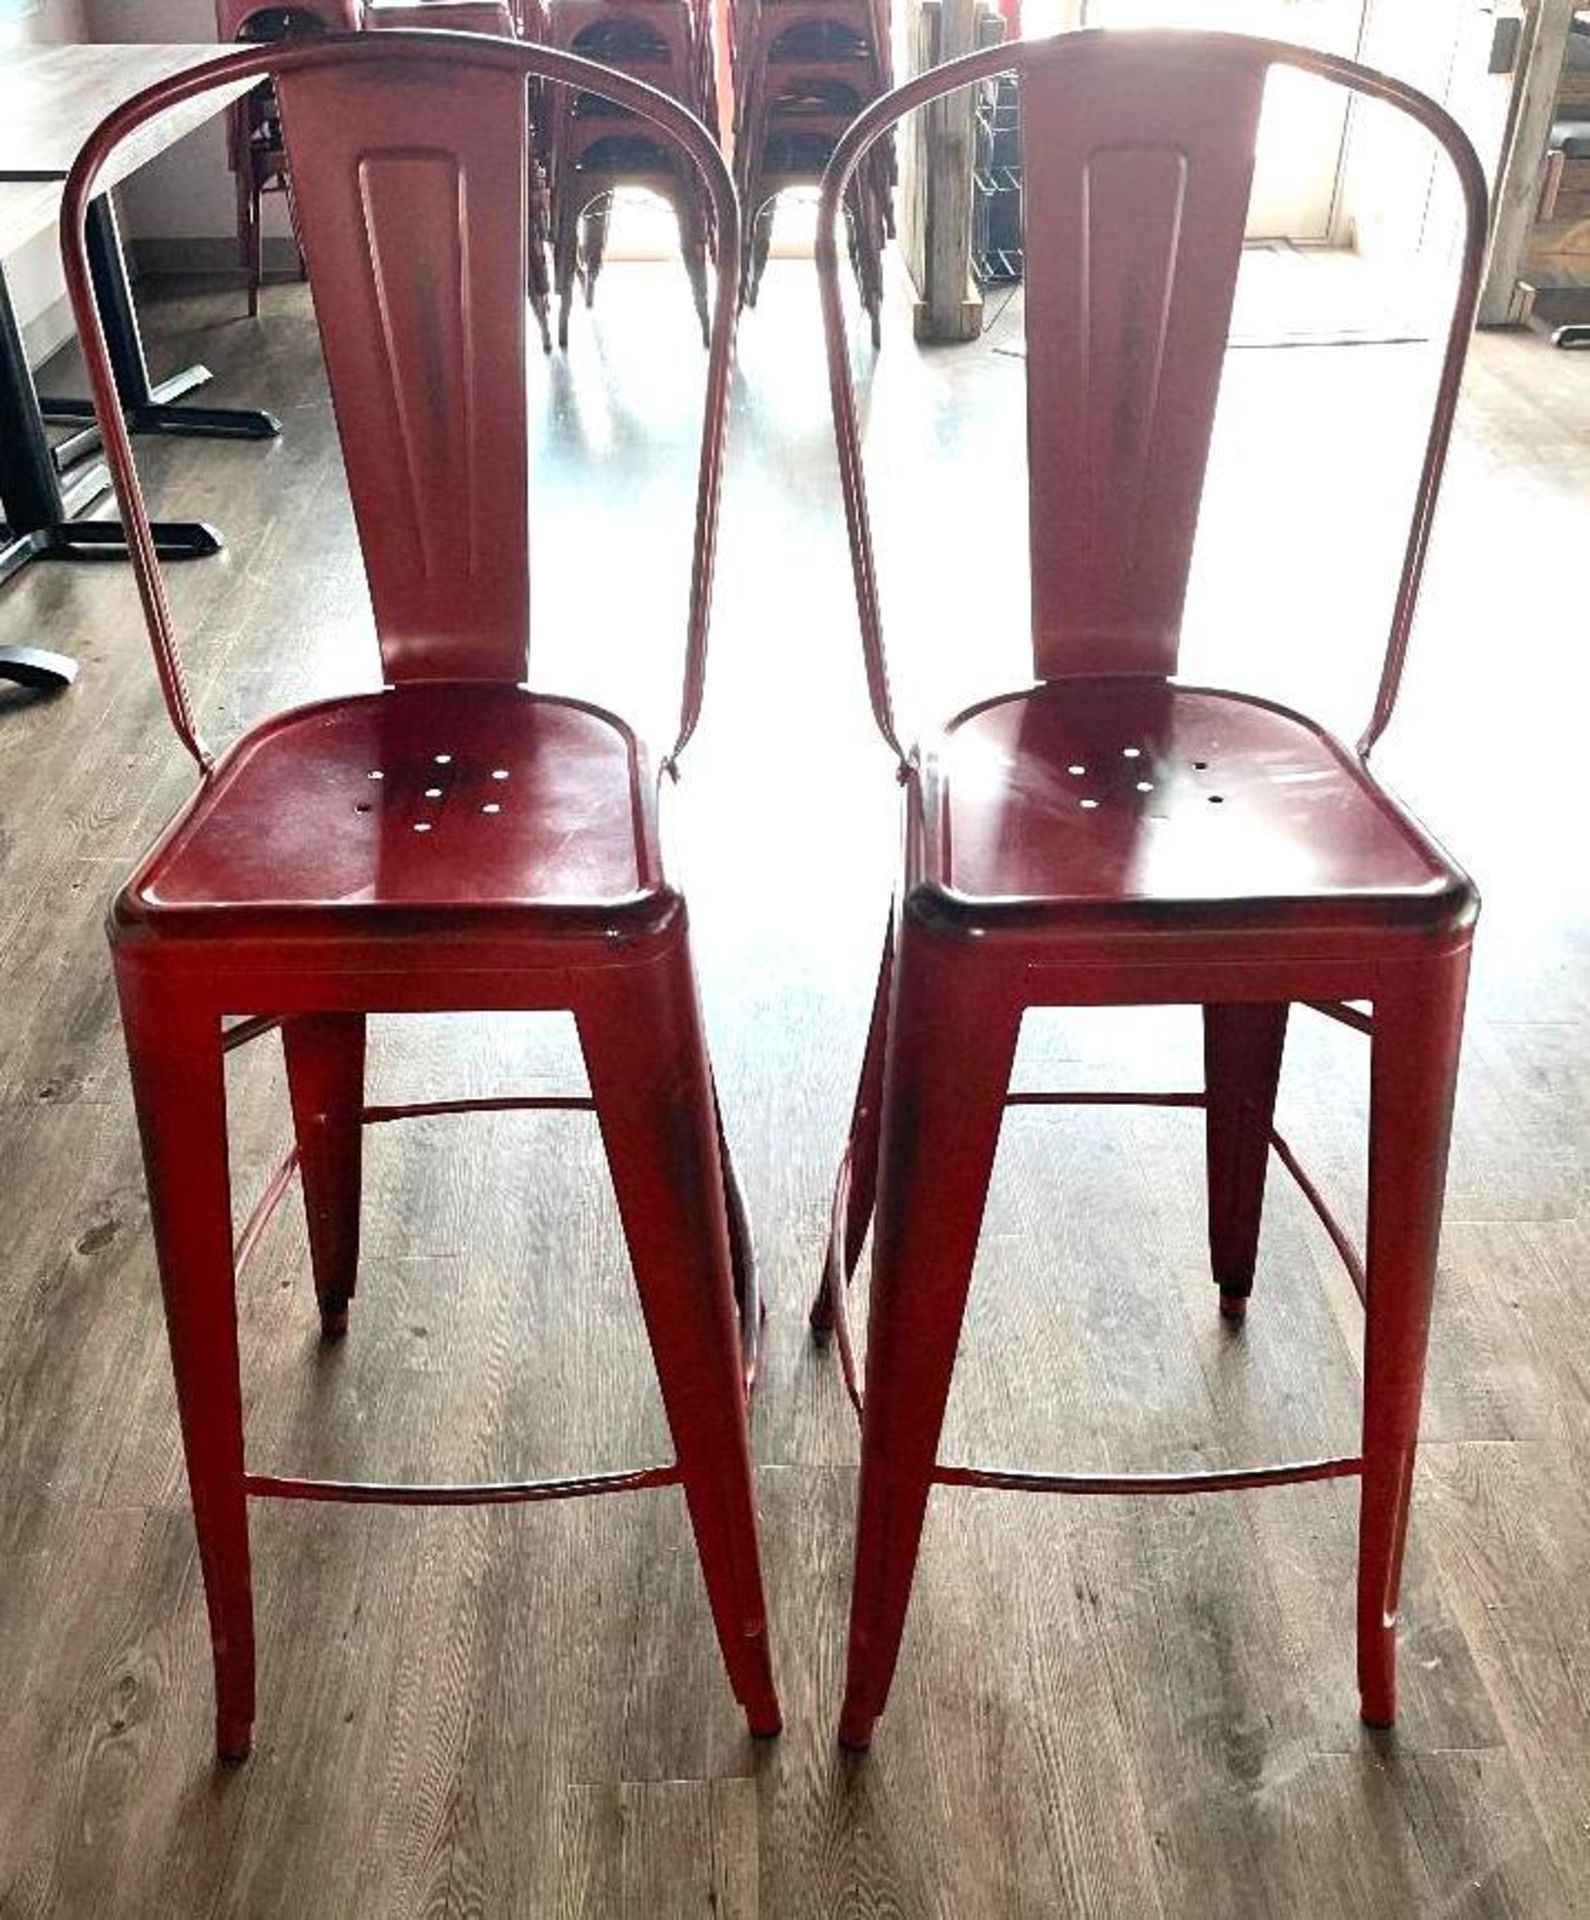 DESCRIPTION: (2) 30" METAL BAR STOOLS ADDITIONAL INFORMATION FADED TABASCO LOCATION: SEATING THIS LO - Image 2 of 3